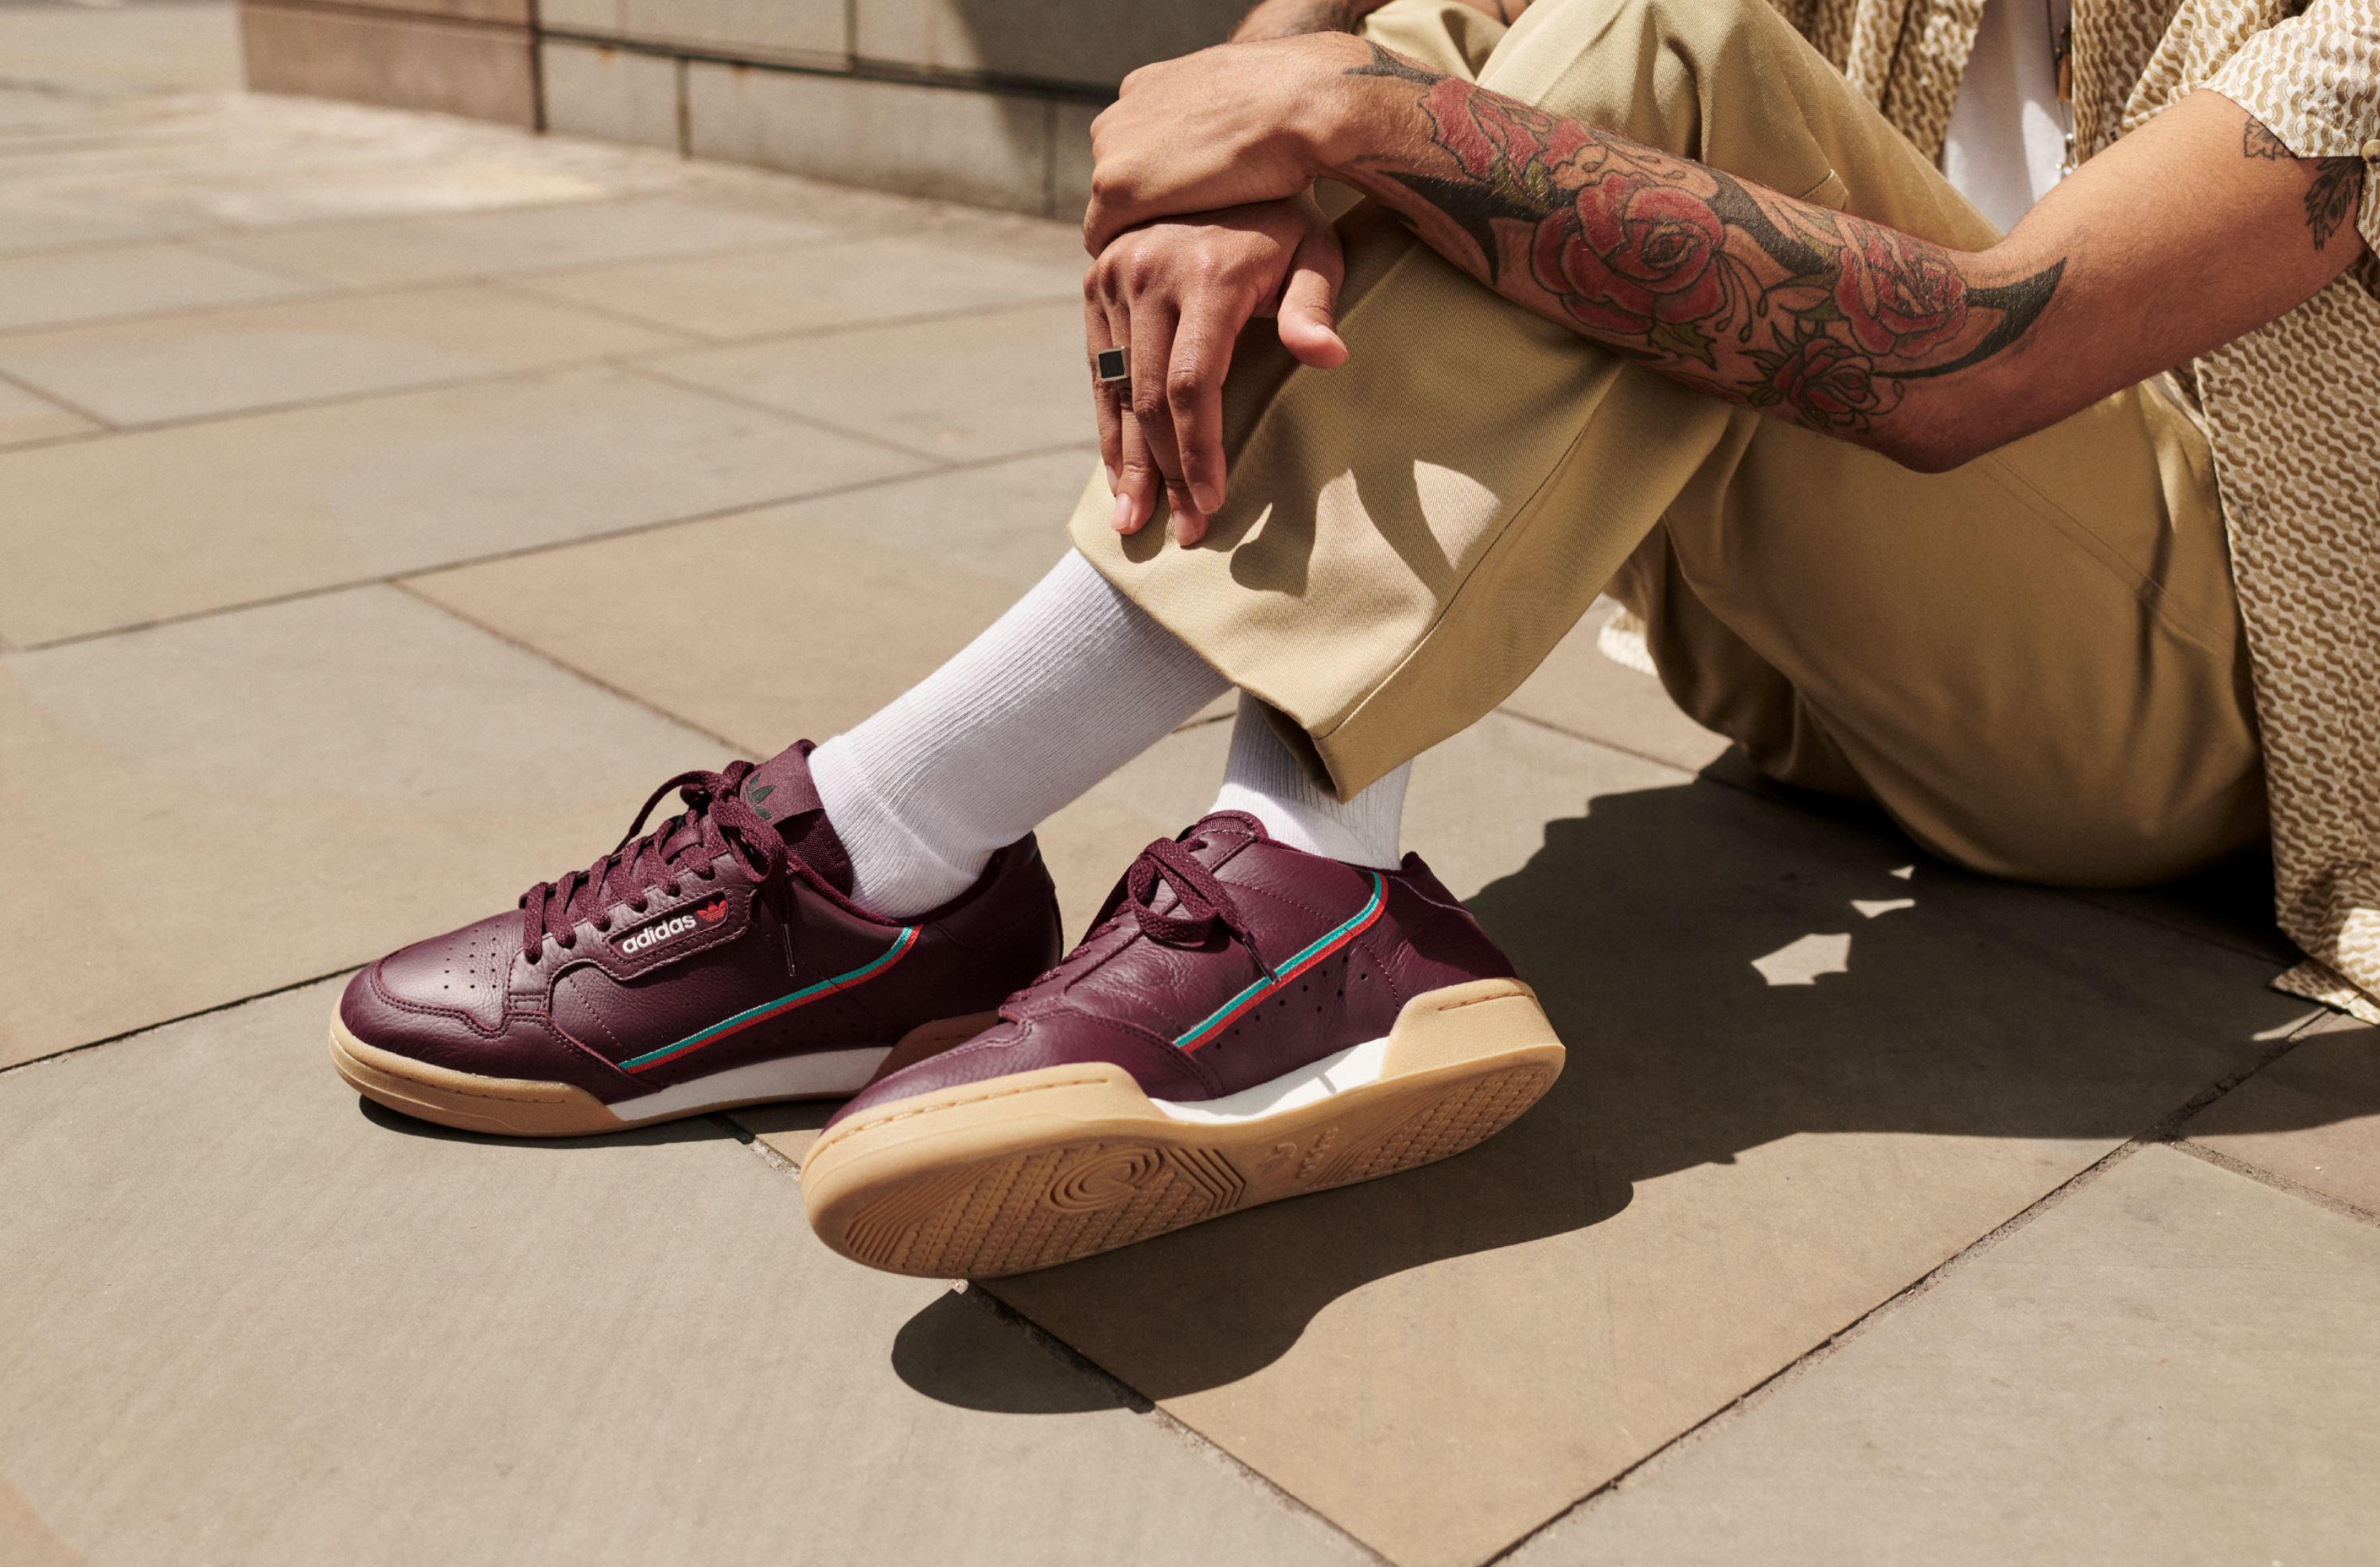 continental 80 shoes maroon